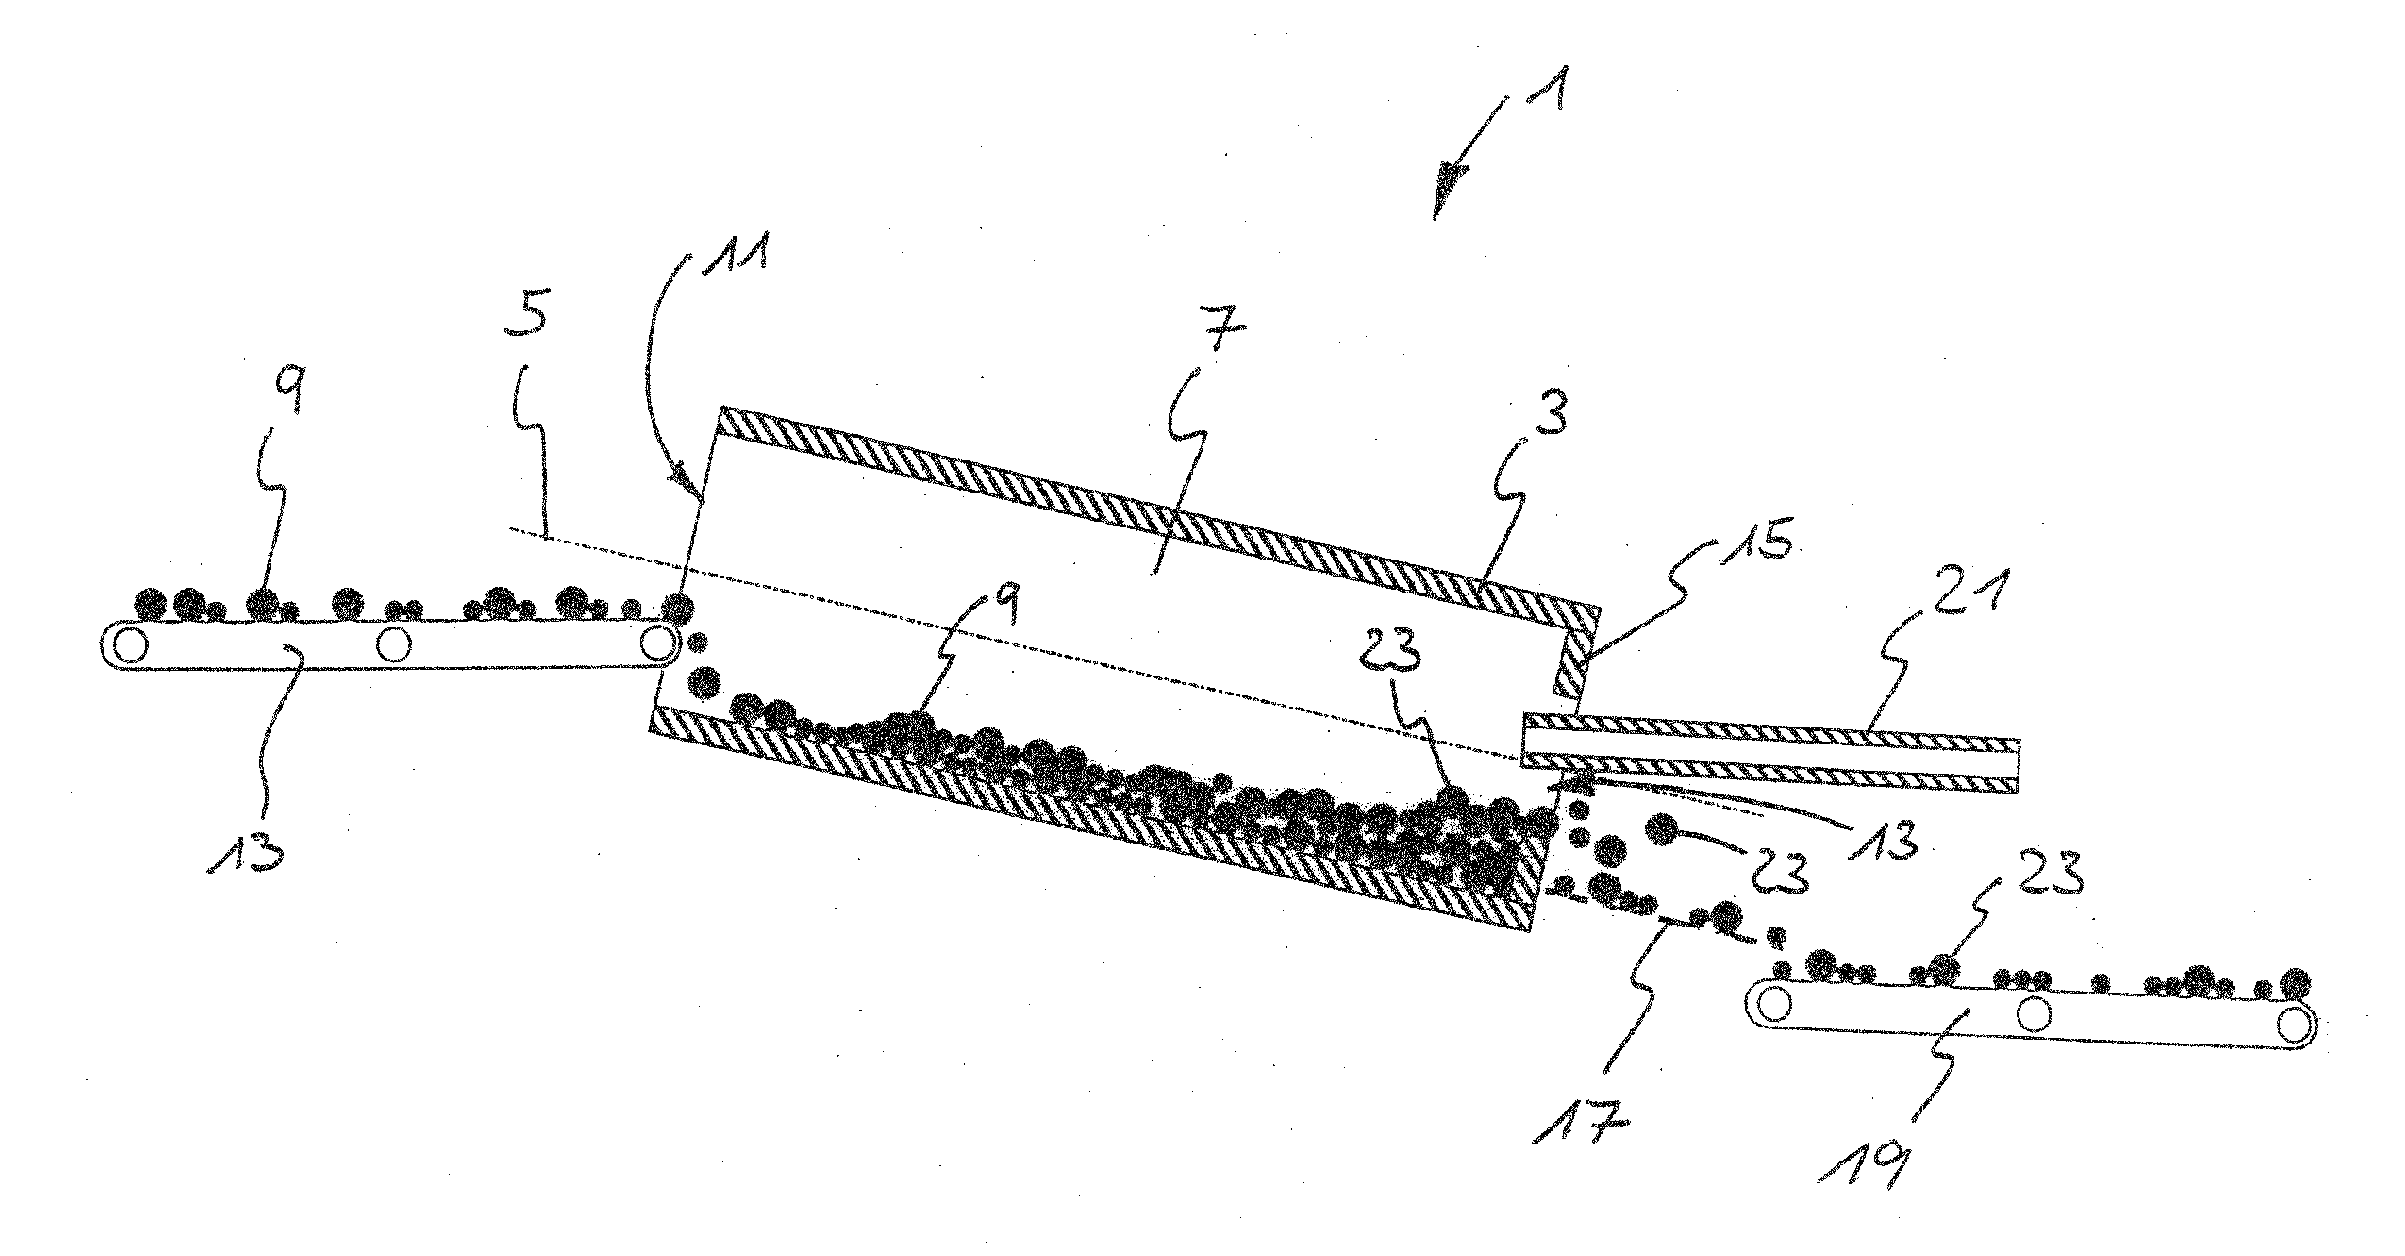 Method for producing aggregate and calcium carbonate from concrete composite materials, and a device for carrying out said method